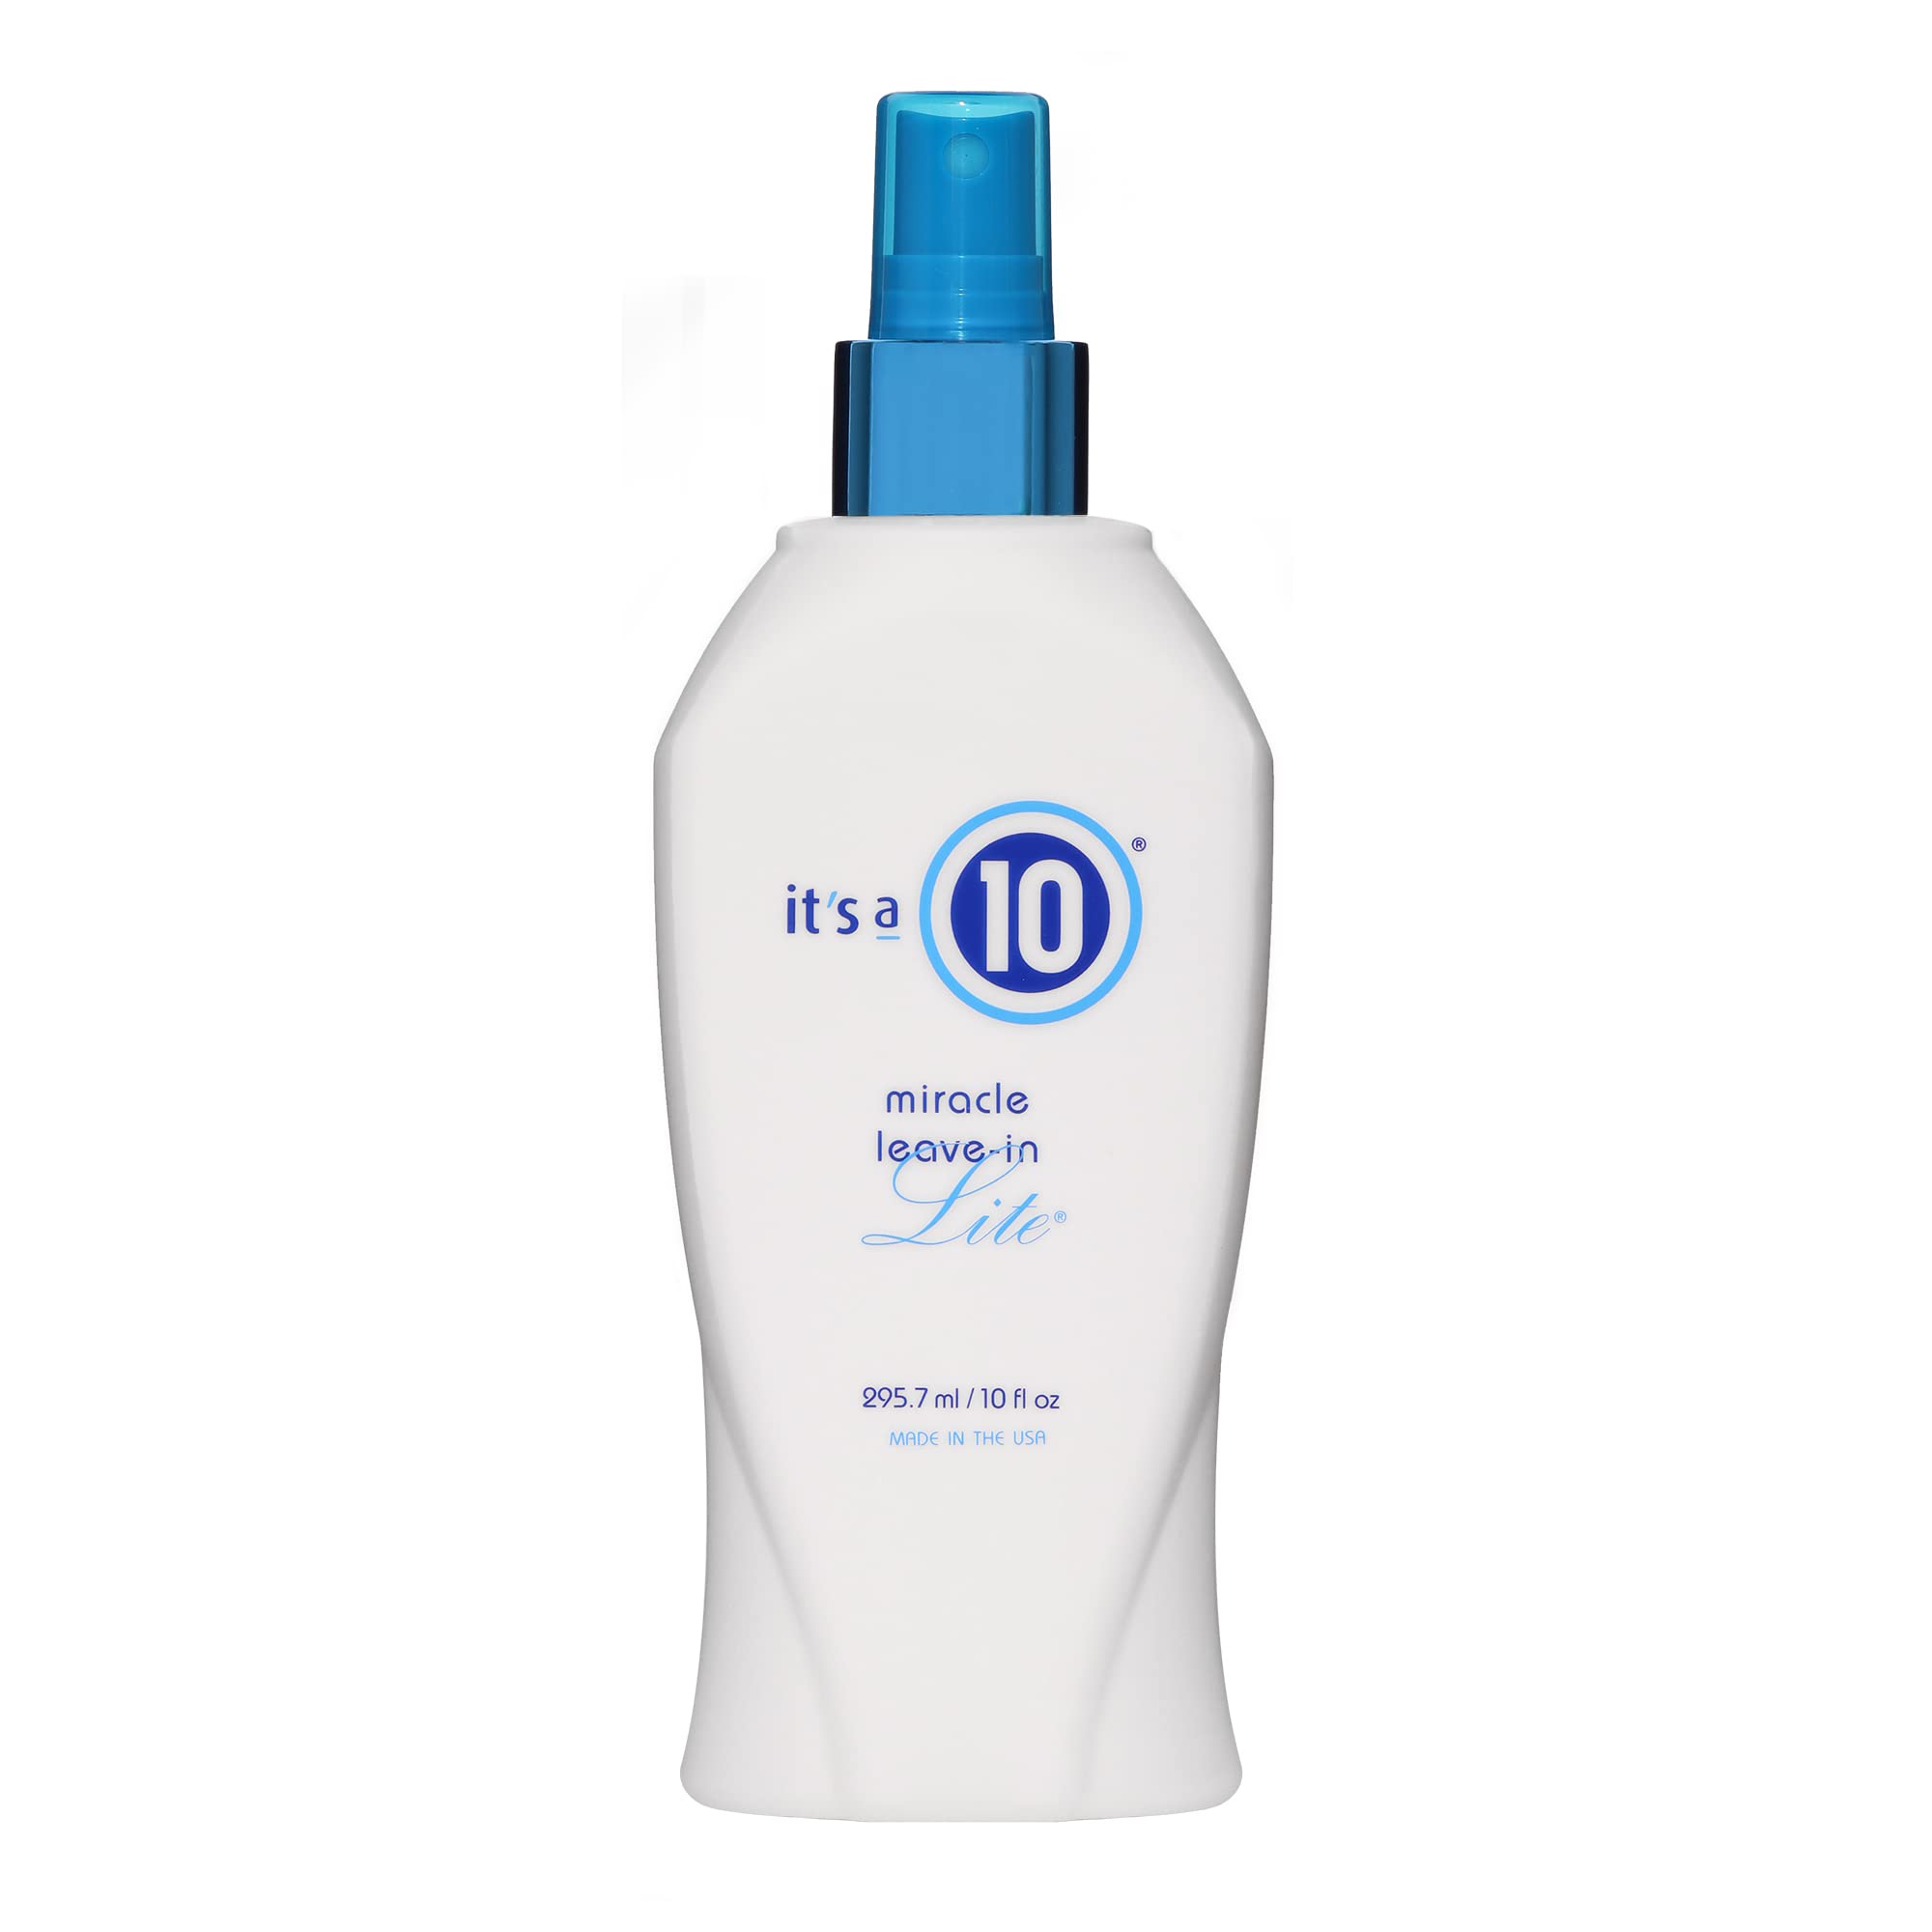 Its A 10 Miracle Leave-In Lite Unisex Hairspray 10 oz